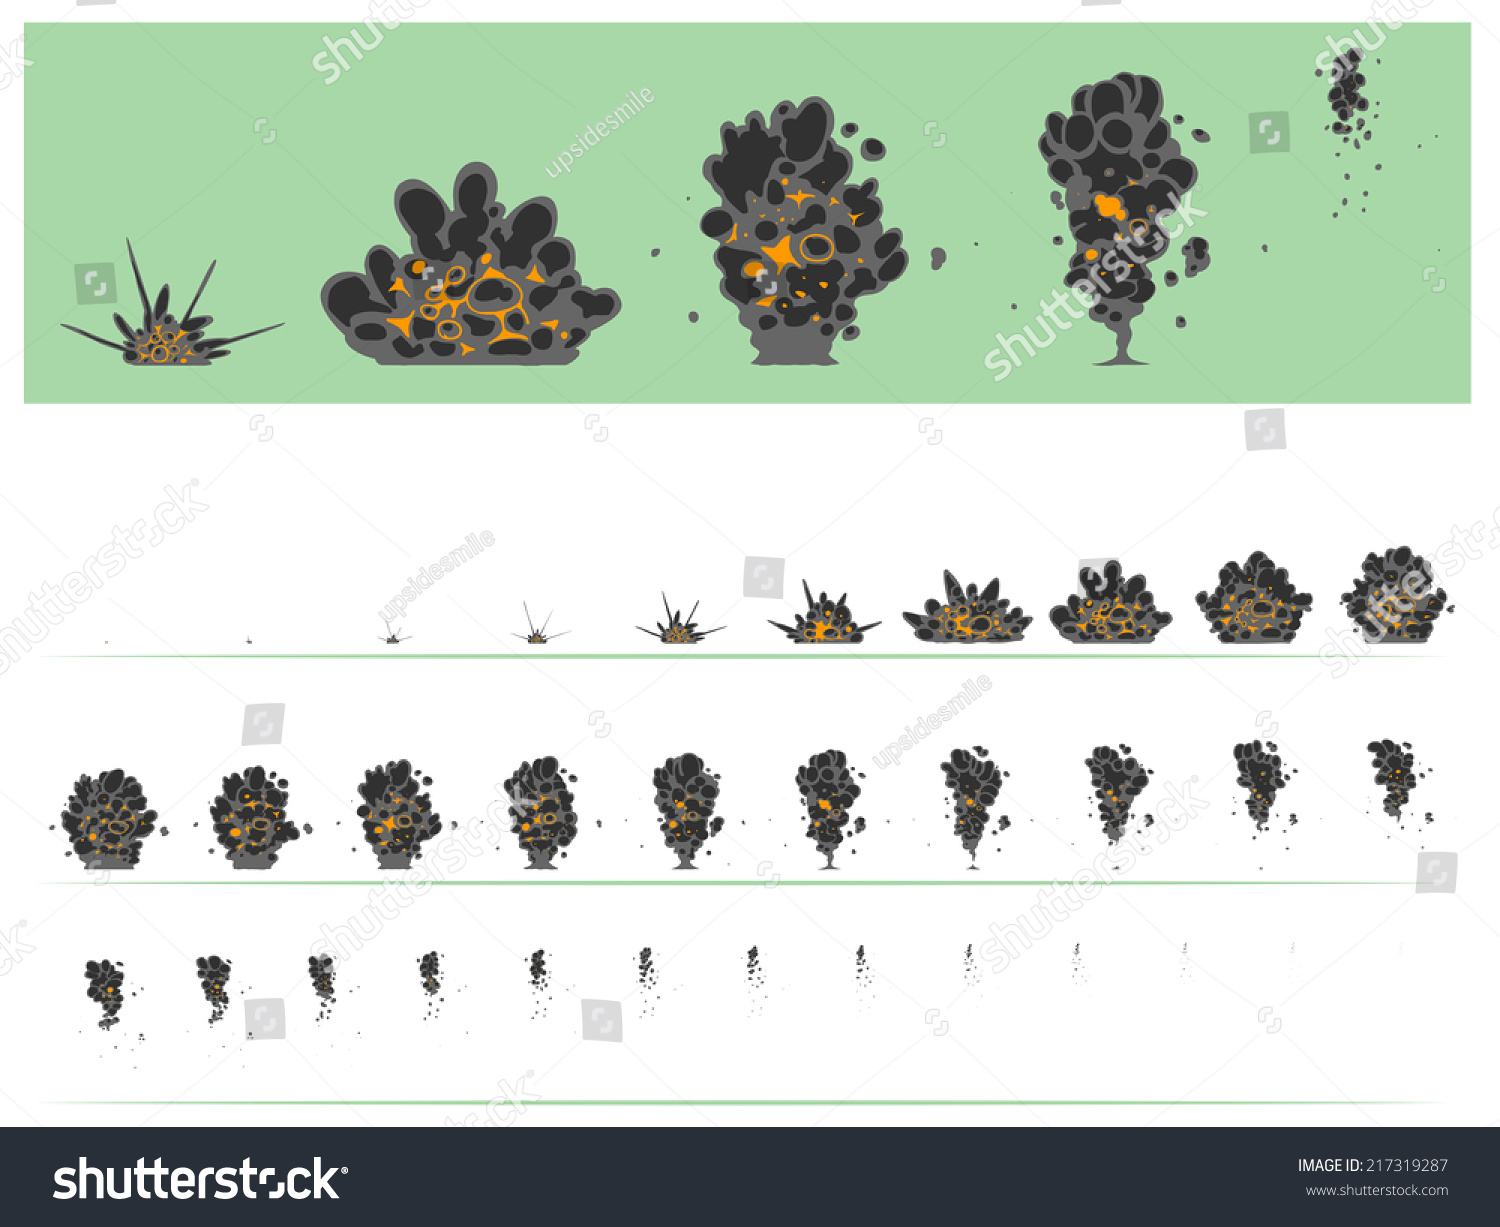 Animation Explosion Stock Vector (Royalty Free) 217319287 - Shutterstock